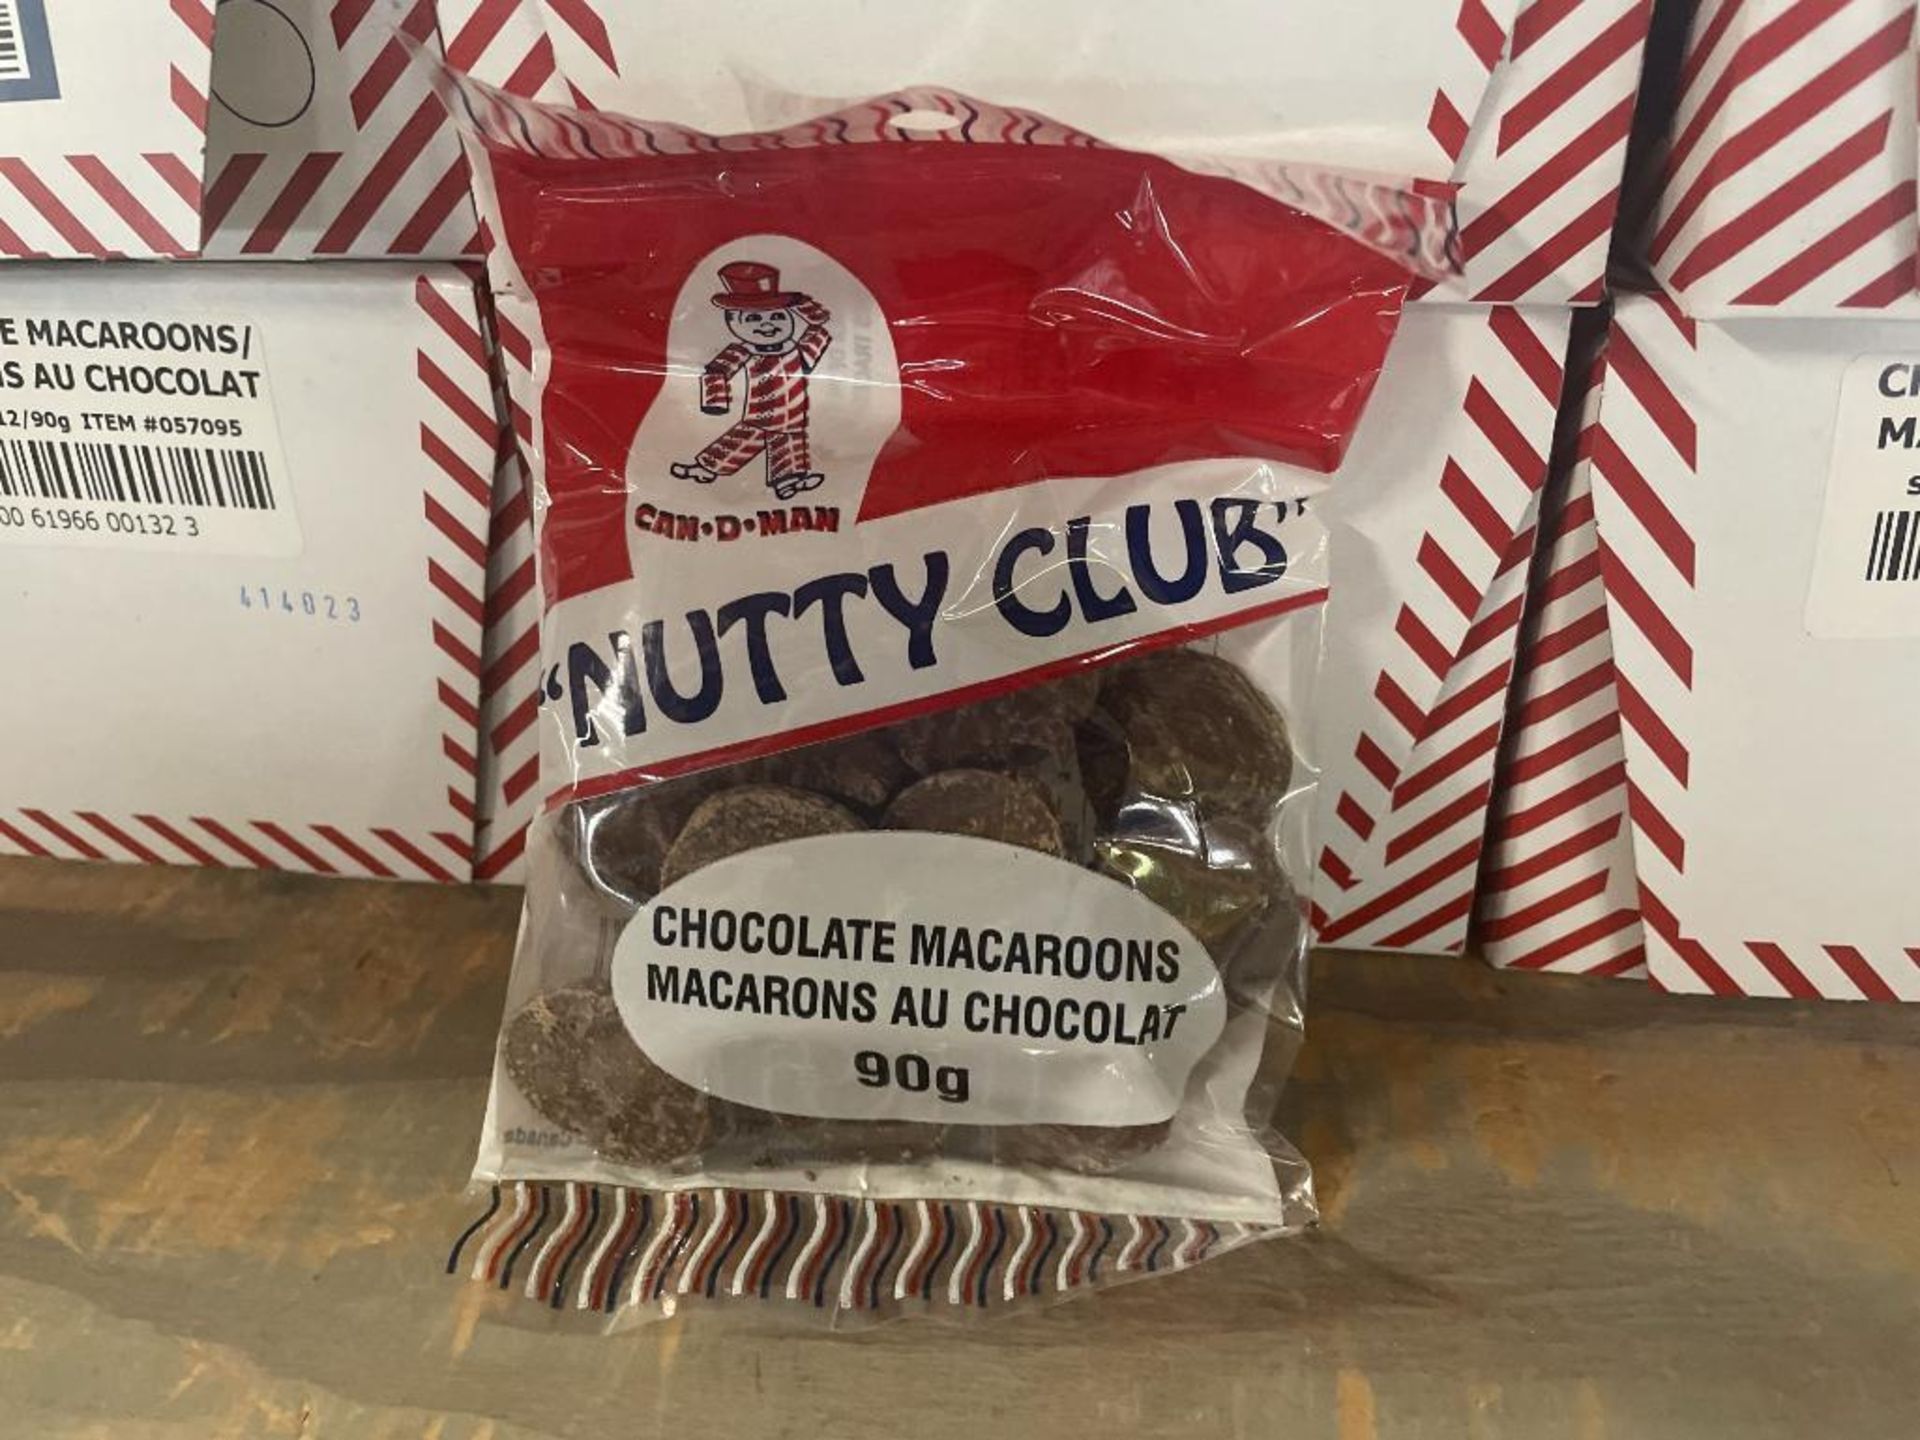 (8) BOXES OF NUTTY CLUB CHOCOLATE MACAROONS, 12/90G PER BOX - Image 2 of 3